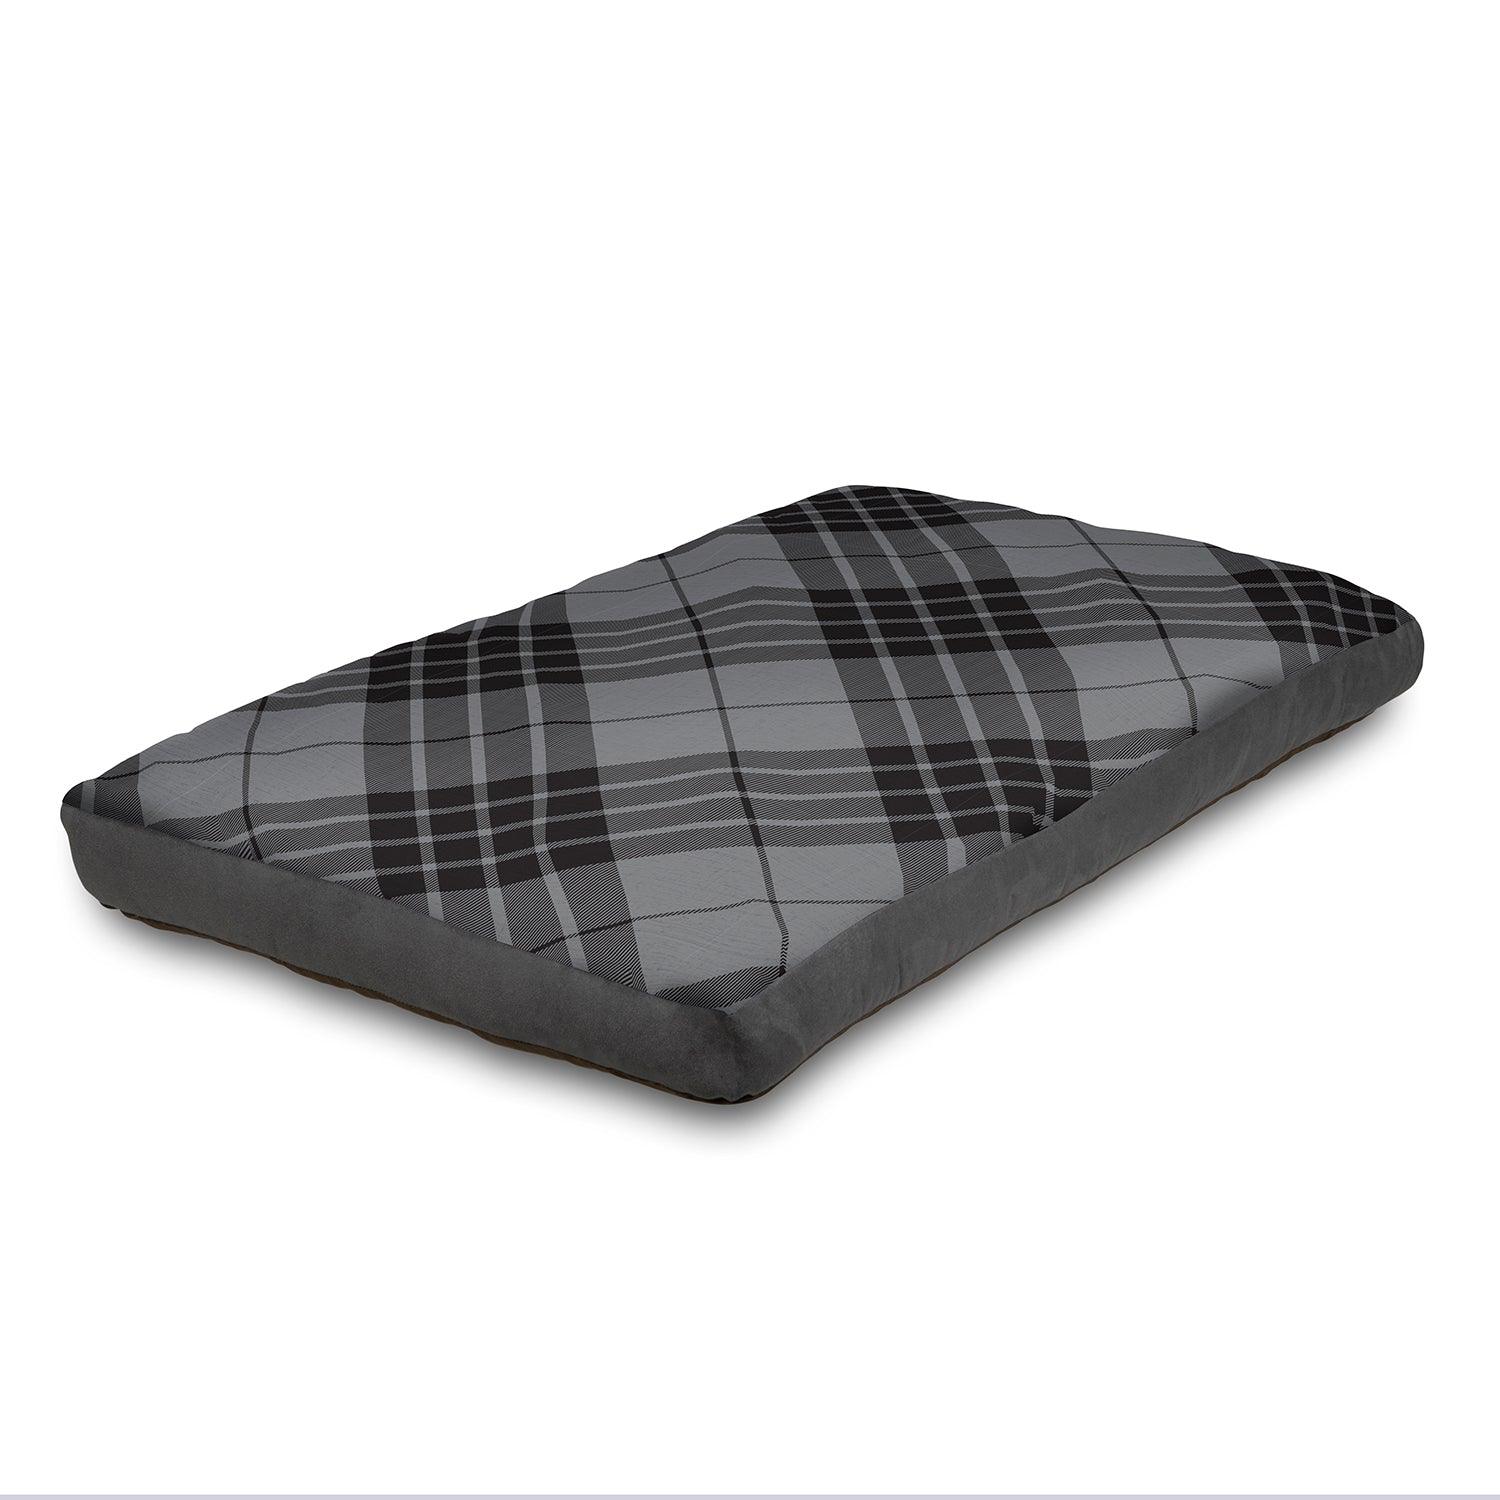 Super Comfy Dog Bed Soft and Fluffy with Washable Cover X-Large - 150 cm x 100 cm Dog Beds 